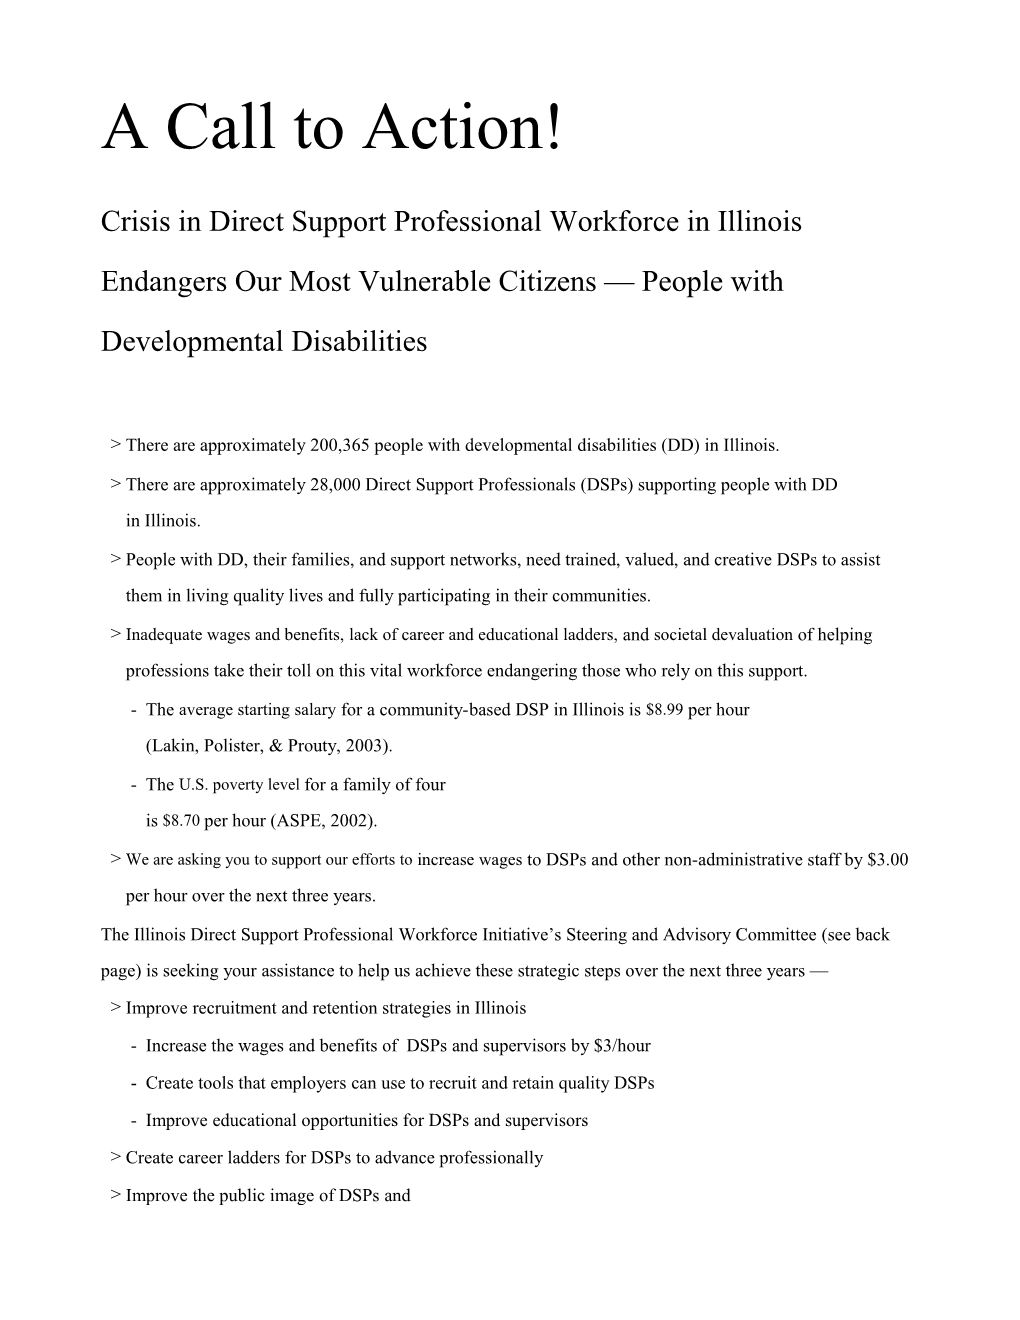 There Are Approximately 200,365 People with Developmental Disabilities (DD) in Illinois